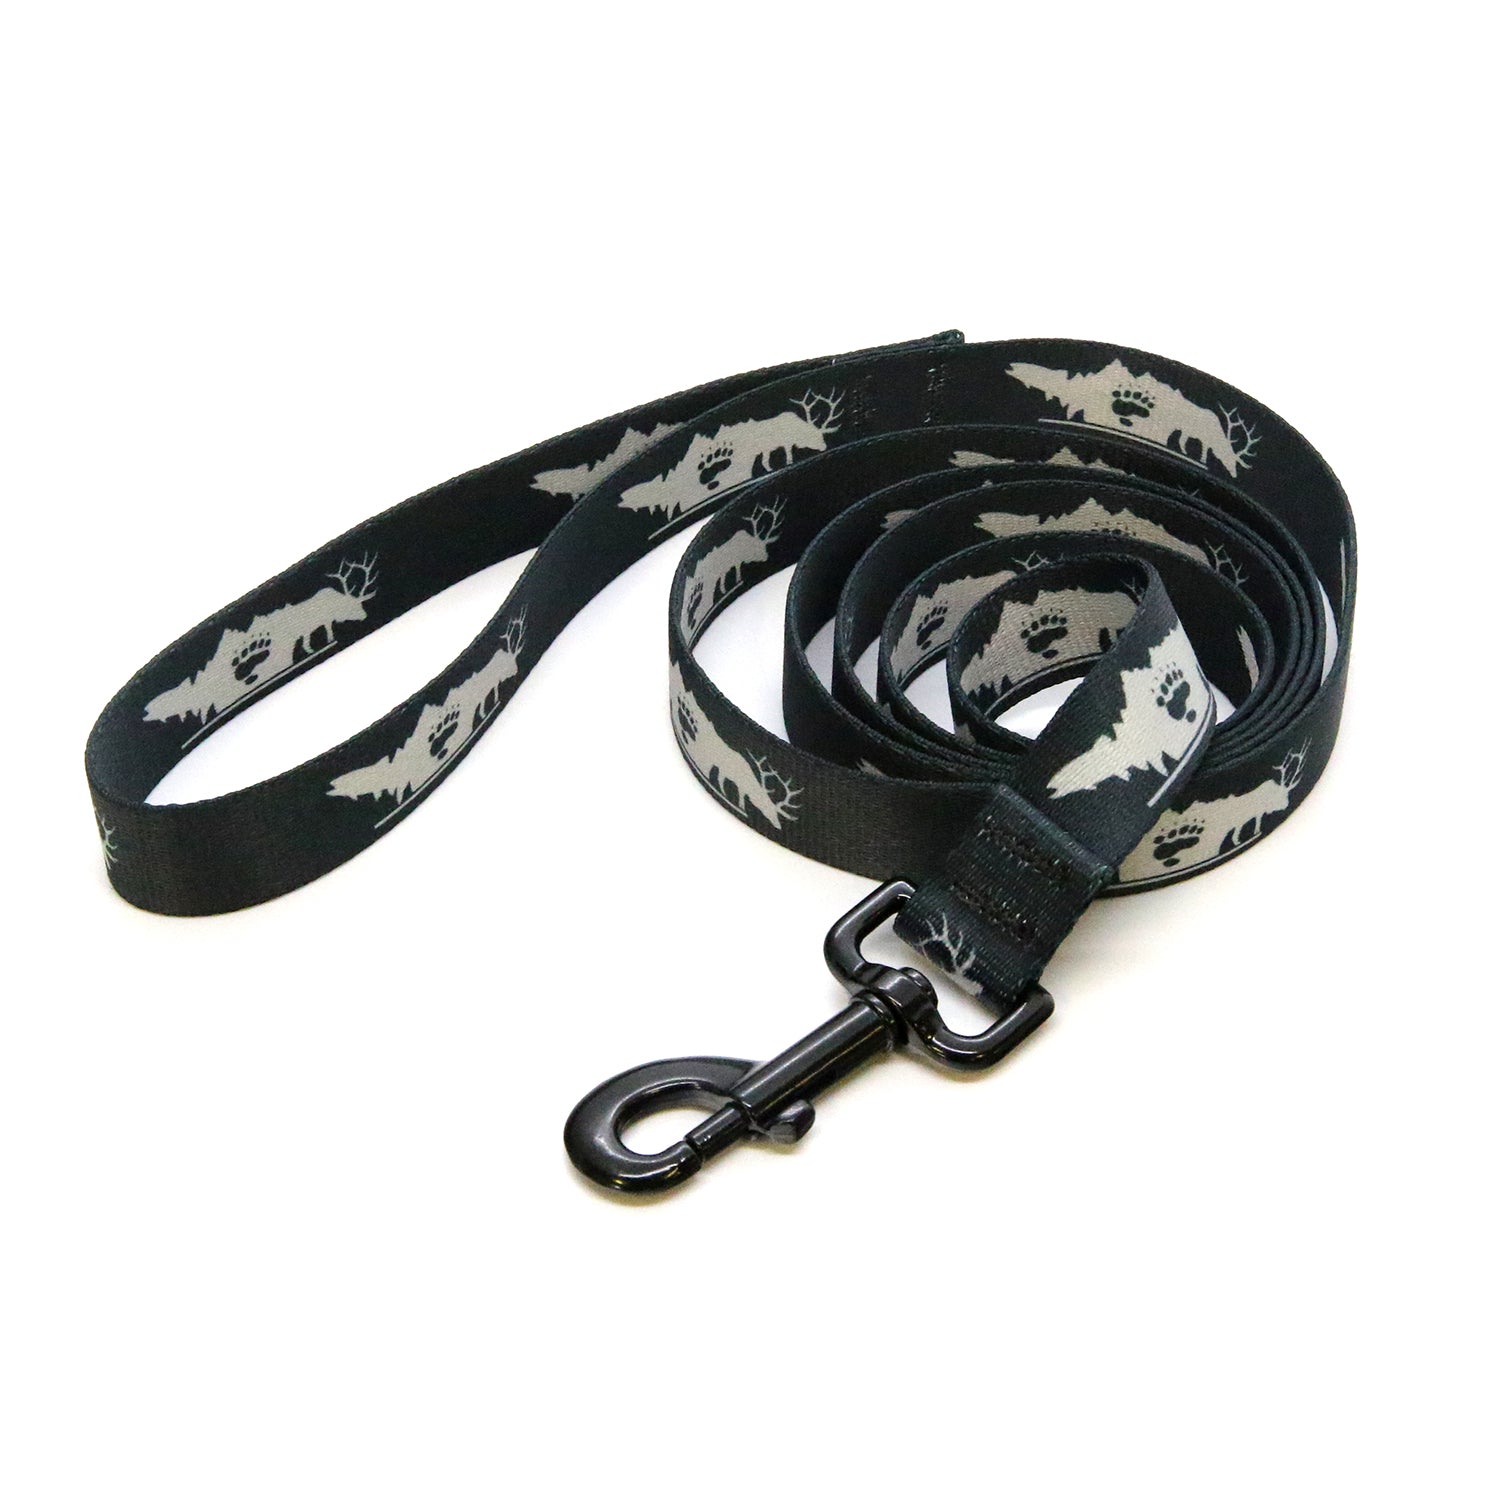 A navy dog leash with a design of a trout bear paw and elk is shown